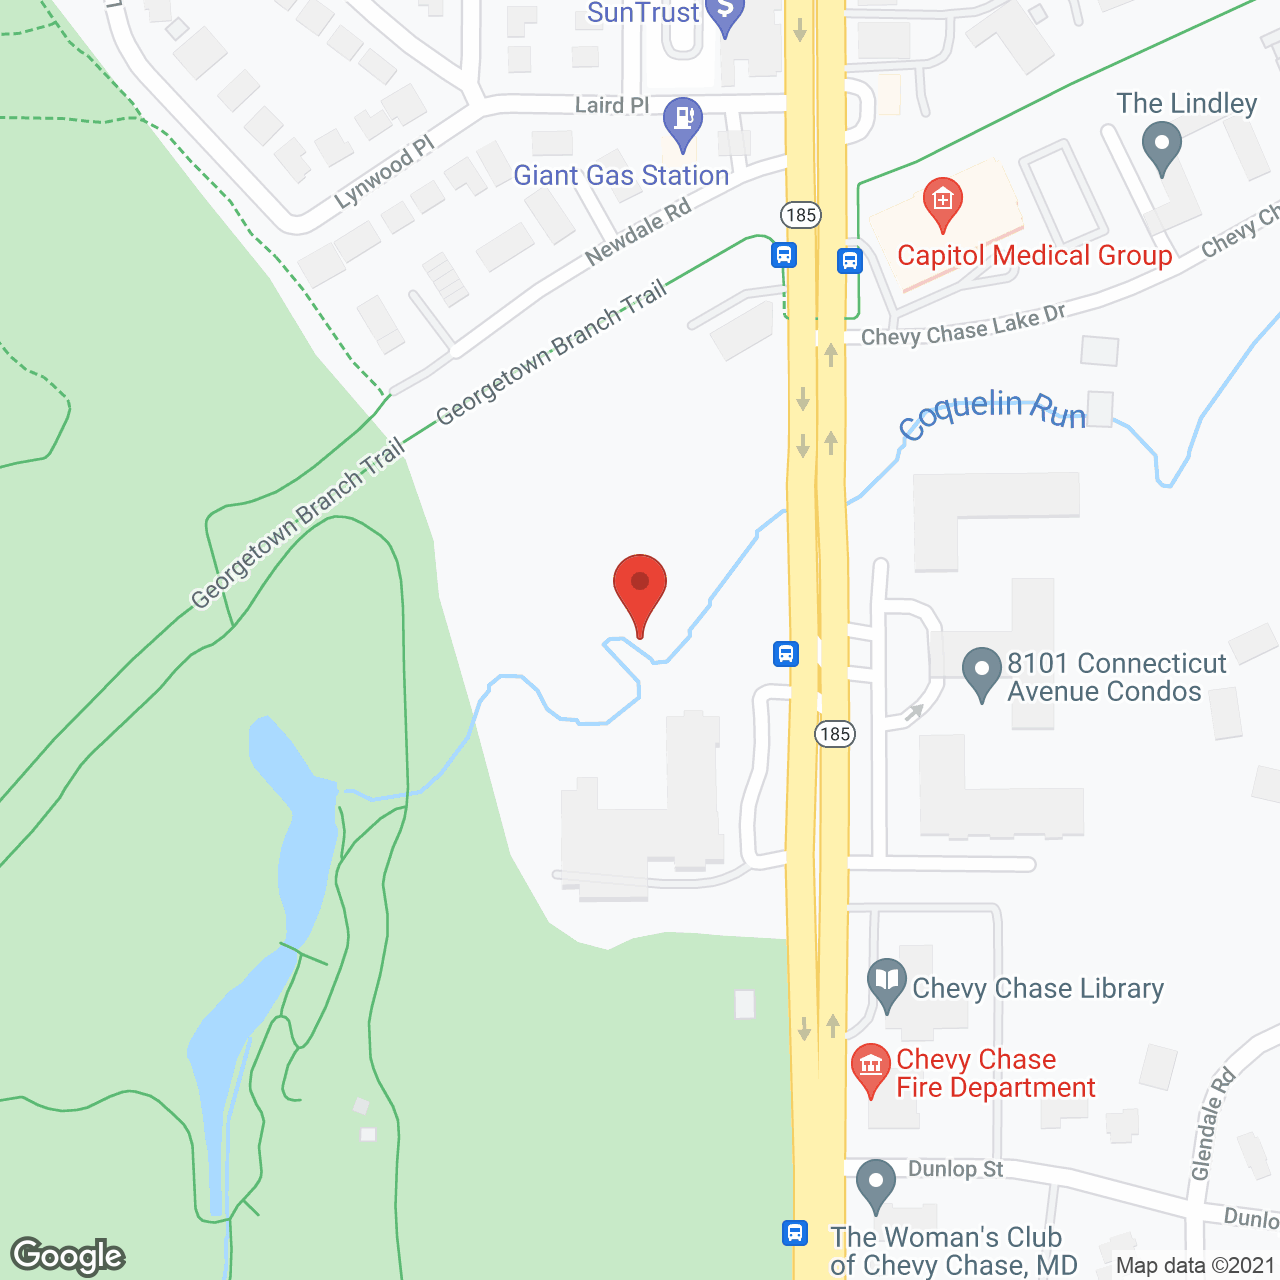 Five Star Premier Residences of Chevy Chase in google map